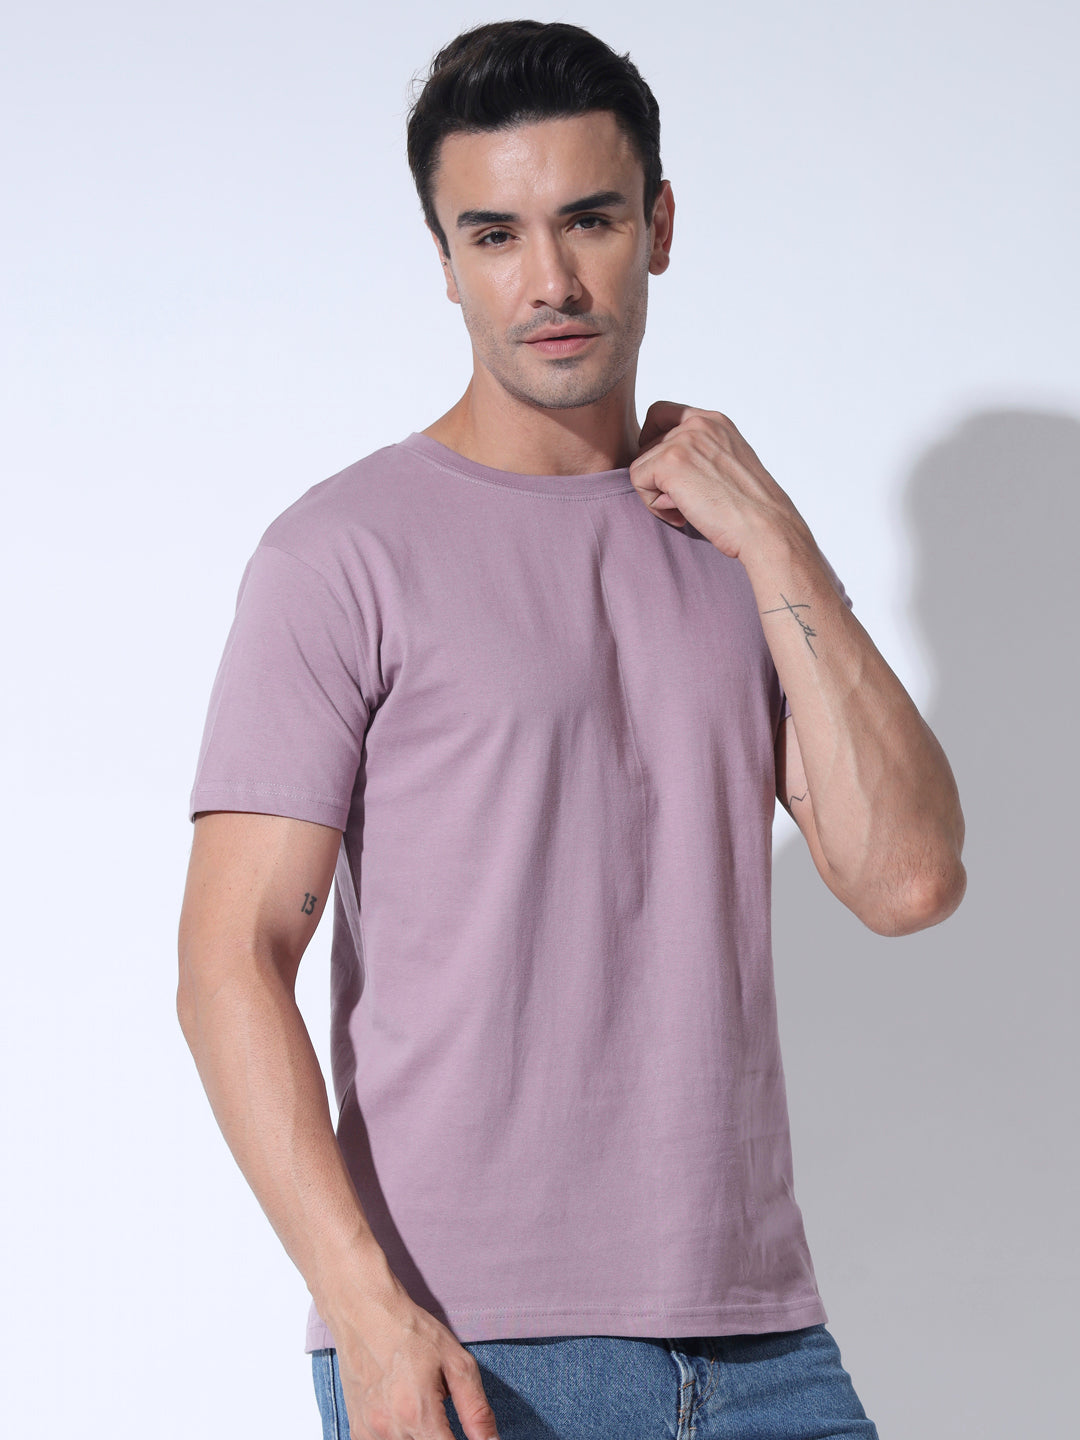 Rosy Brown Tee